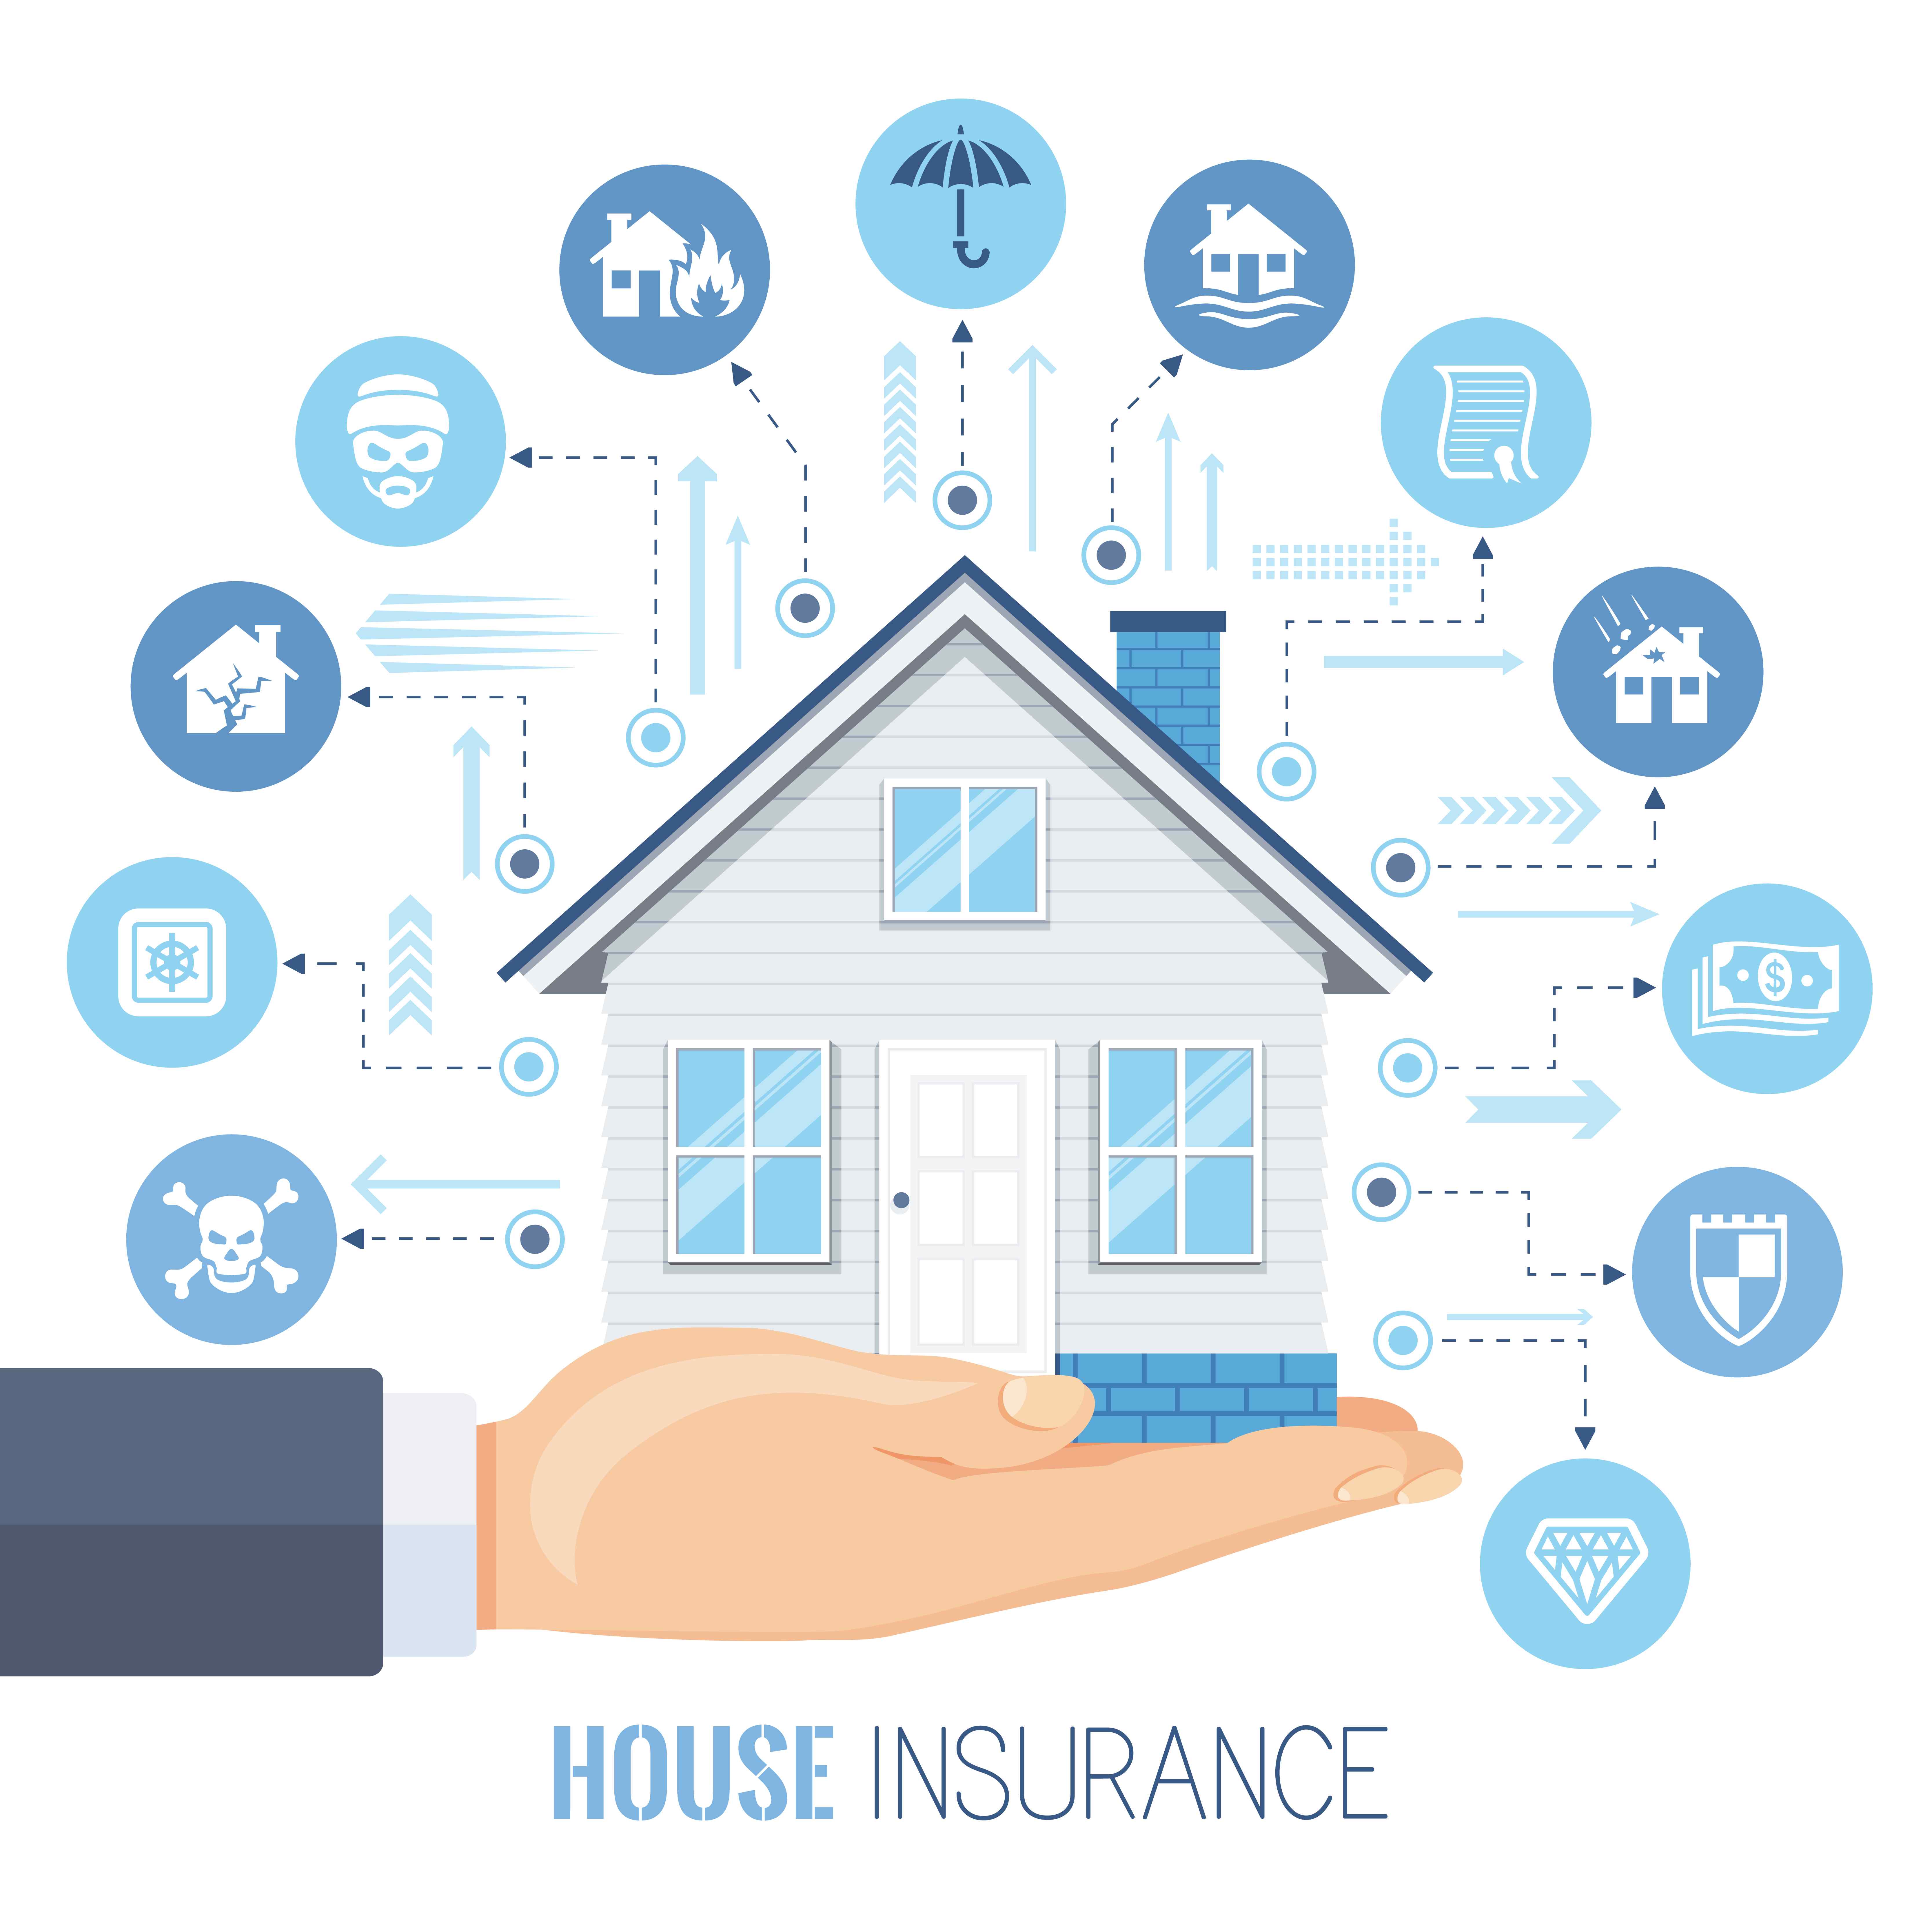 Buying a Home Insurance policy? Here's what you need to know